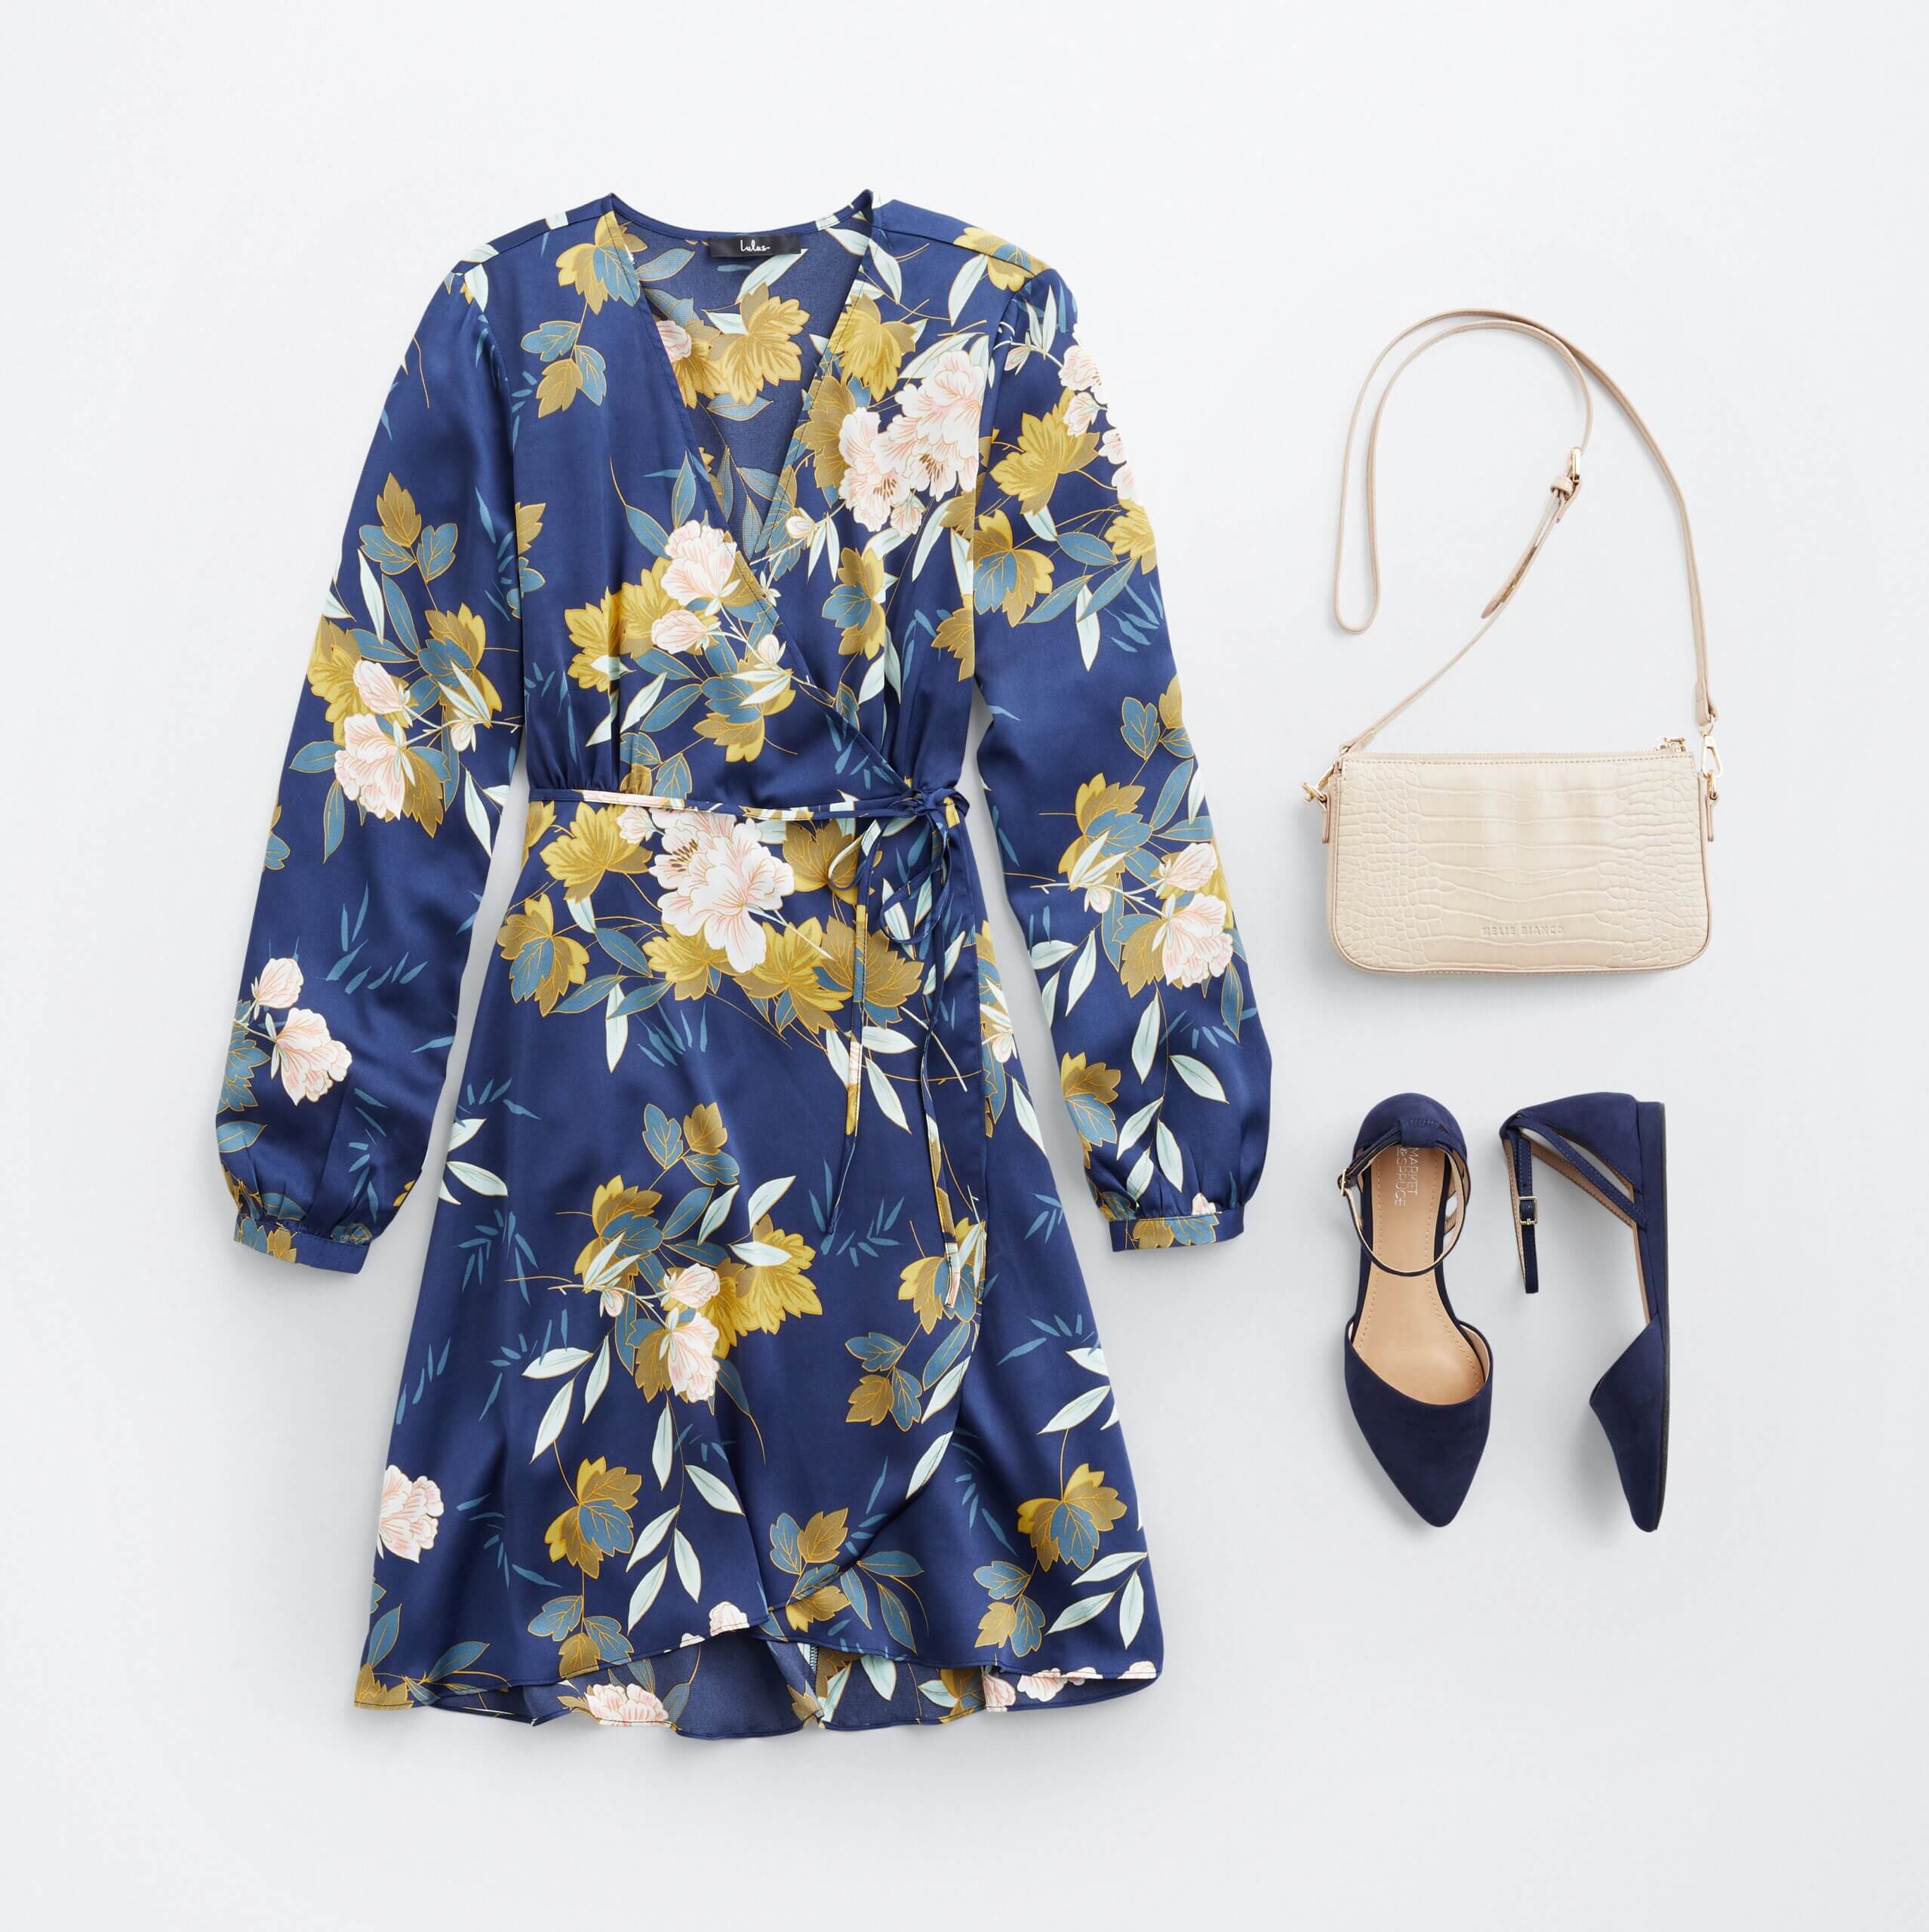 Stitch Fix women's outfit laydown featuring blue floral dress, blue ankle strap flats and white crossbody purse.